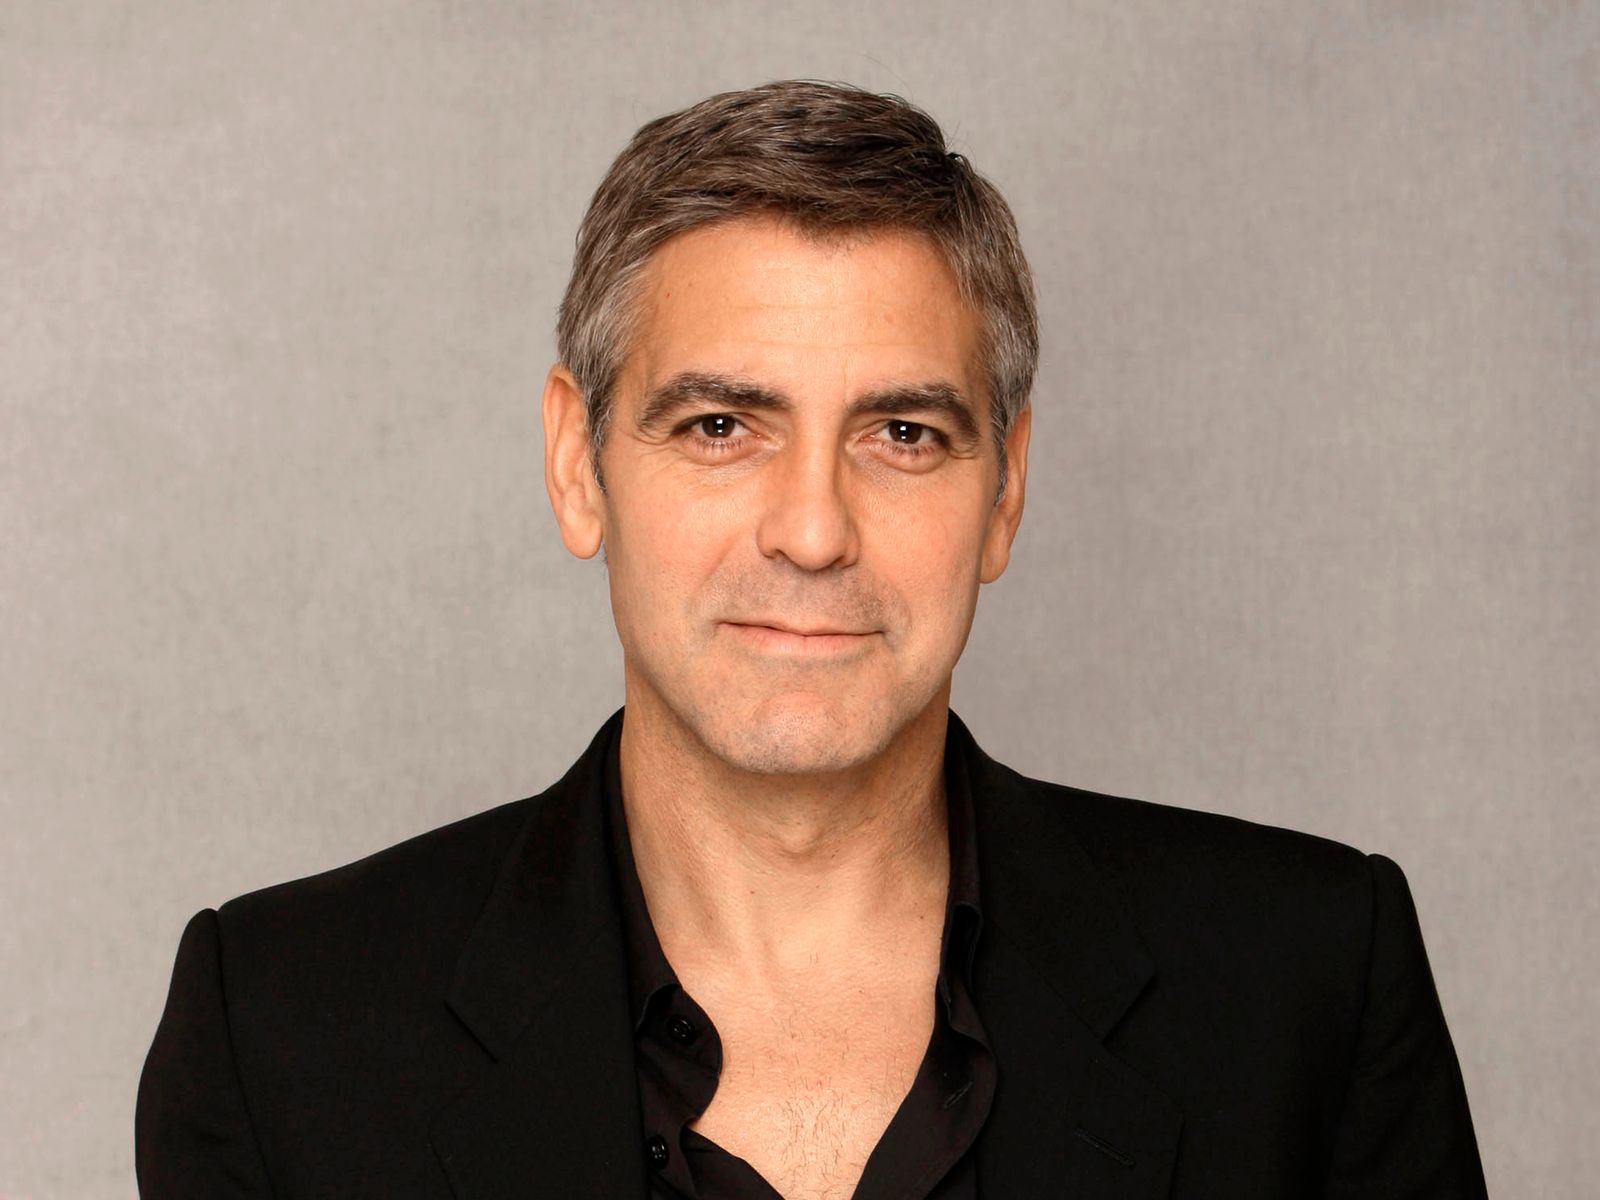 George Clooney’s ‘Suburbicon’ Booked For Award Season Debut